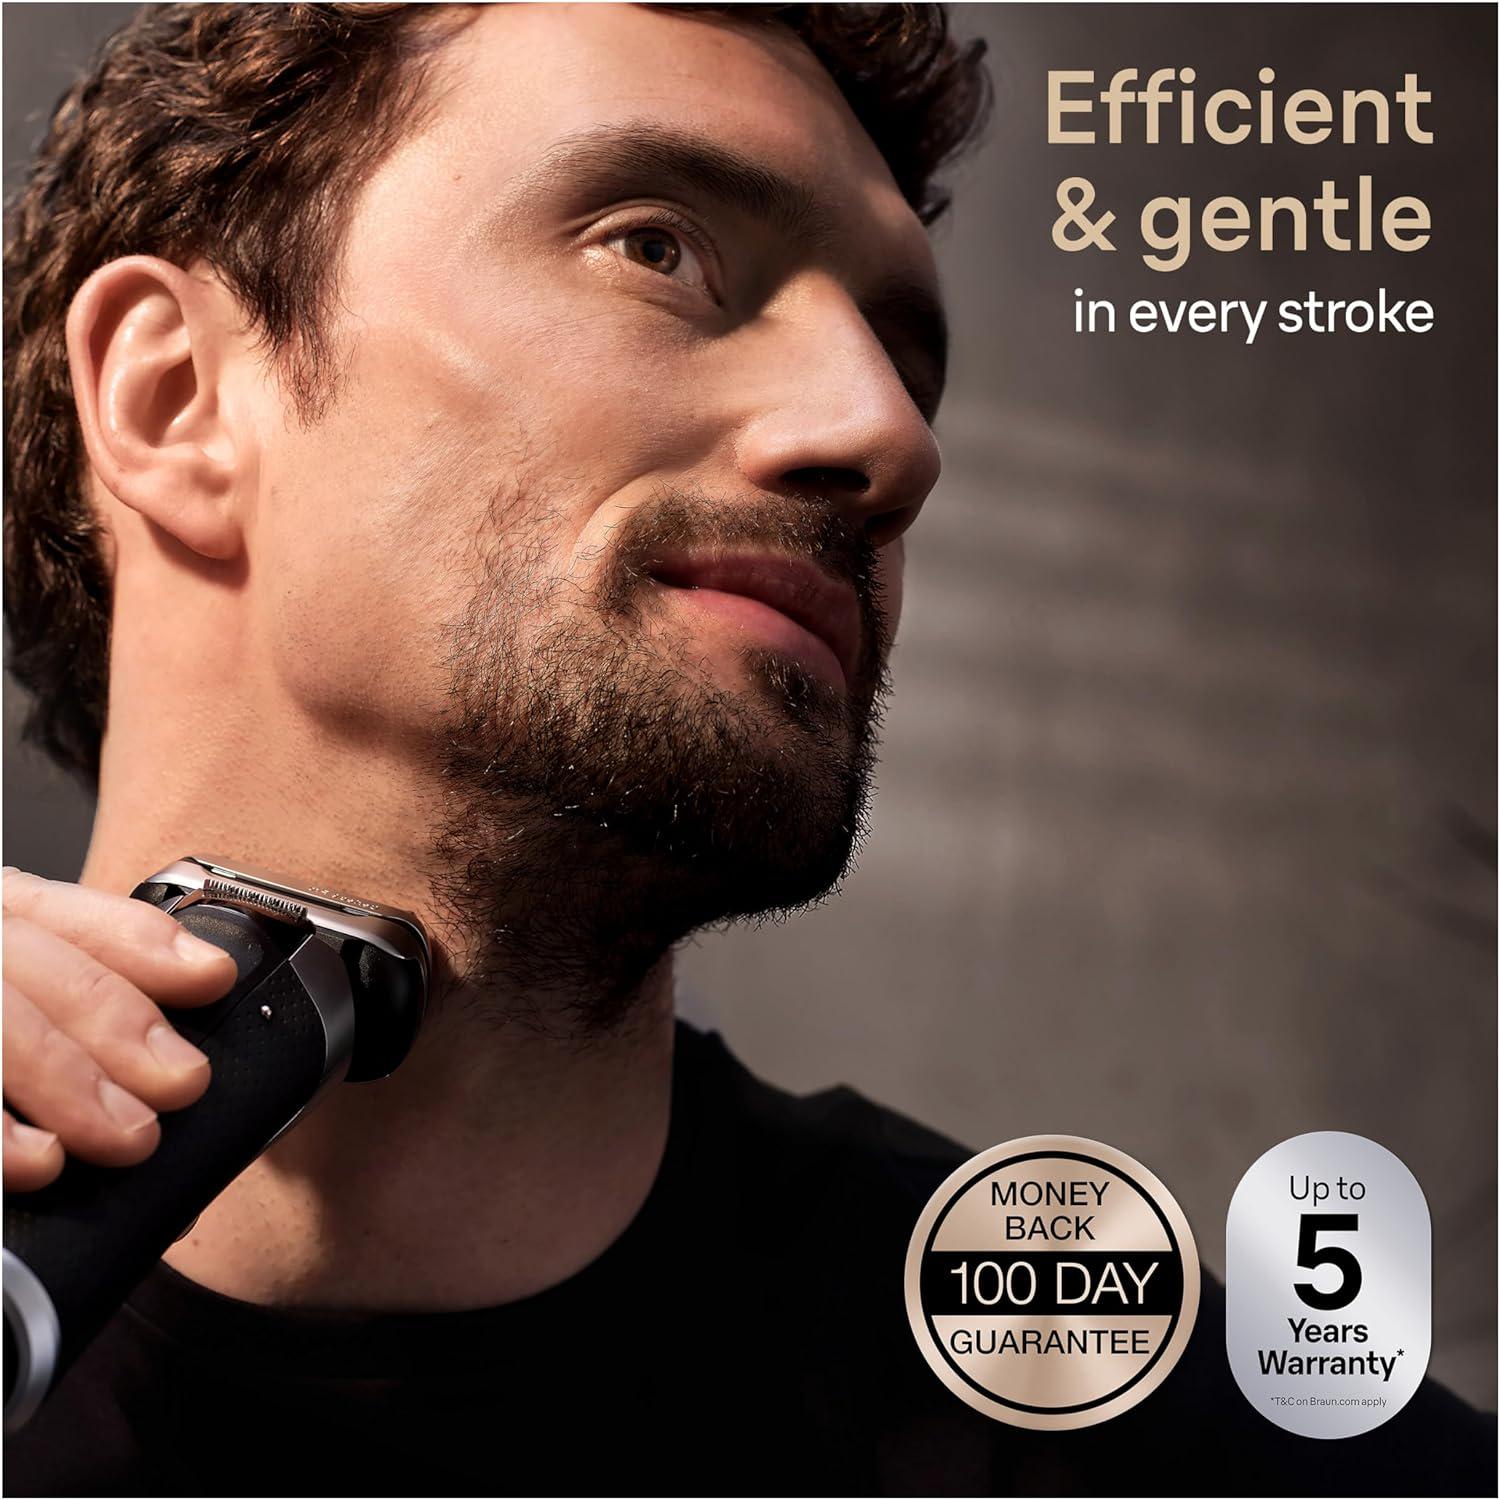 Braun Series 9 Pro+  9417s Electric Shaver - Wet & Dry